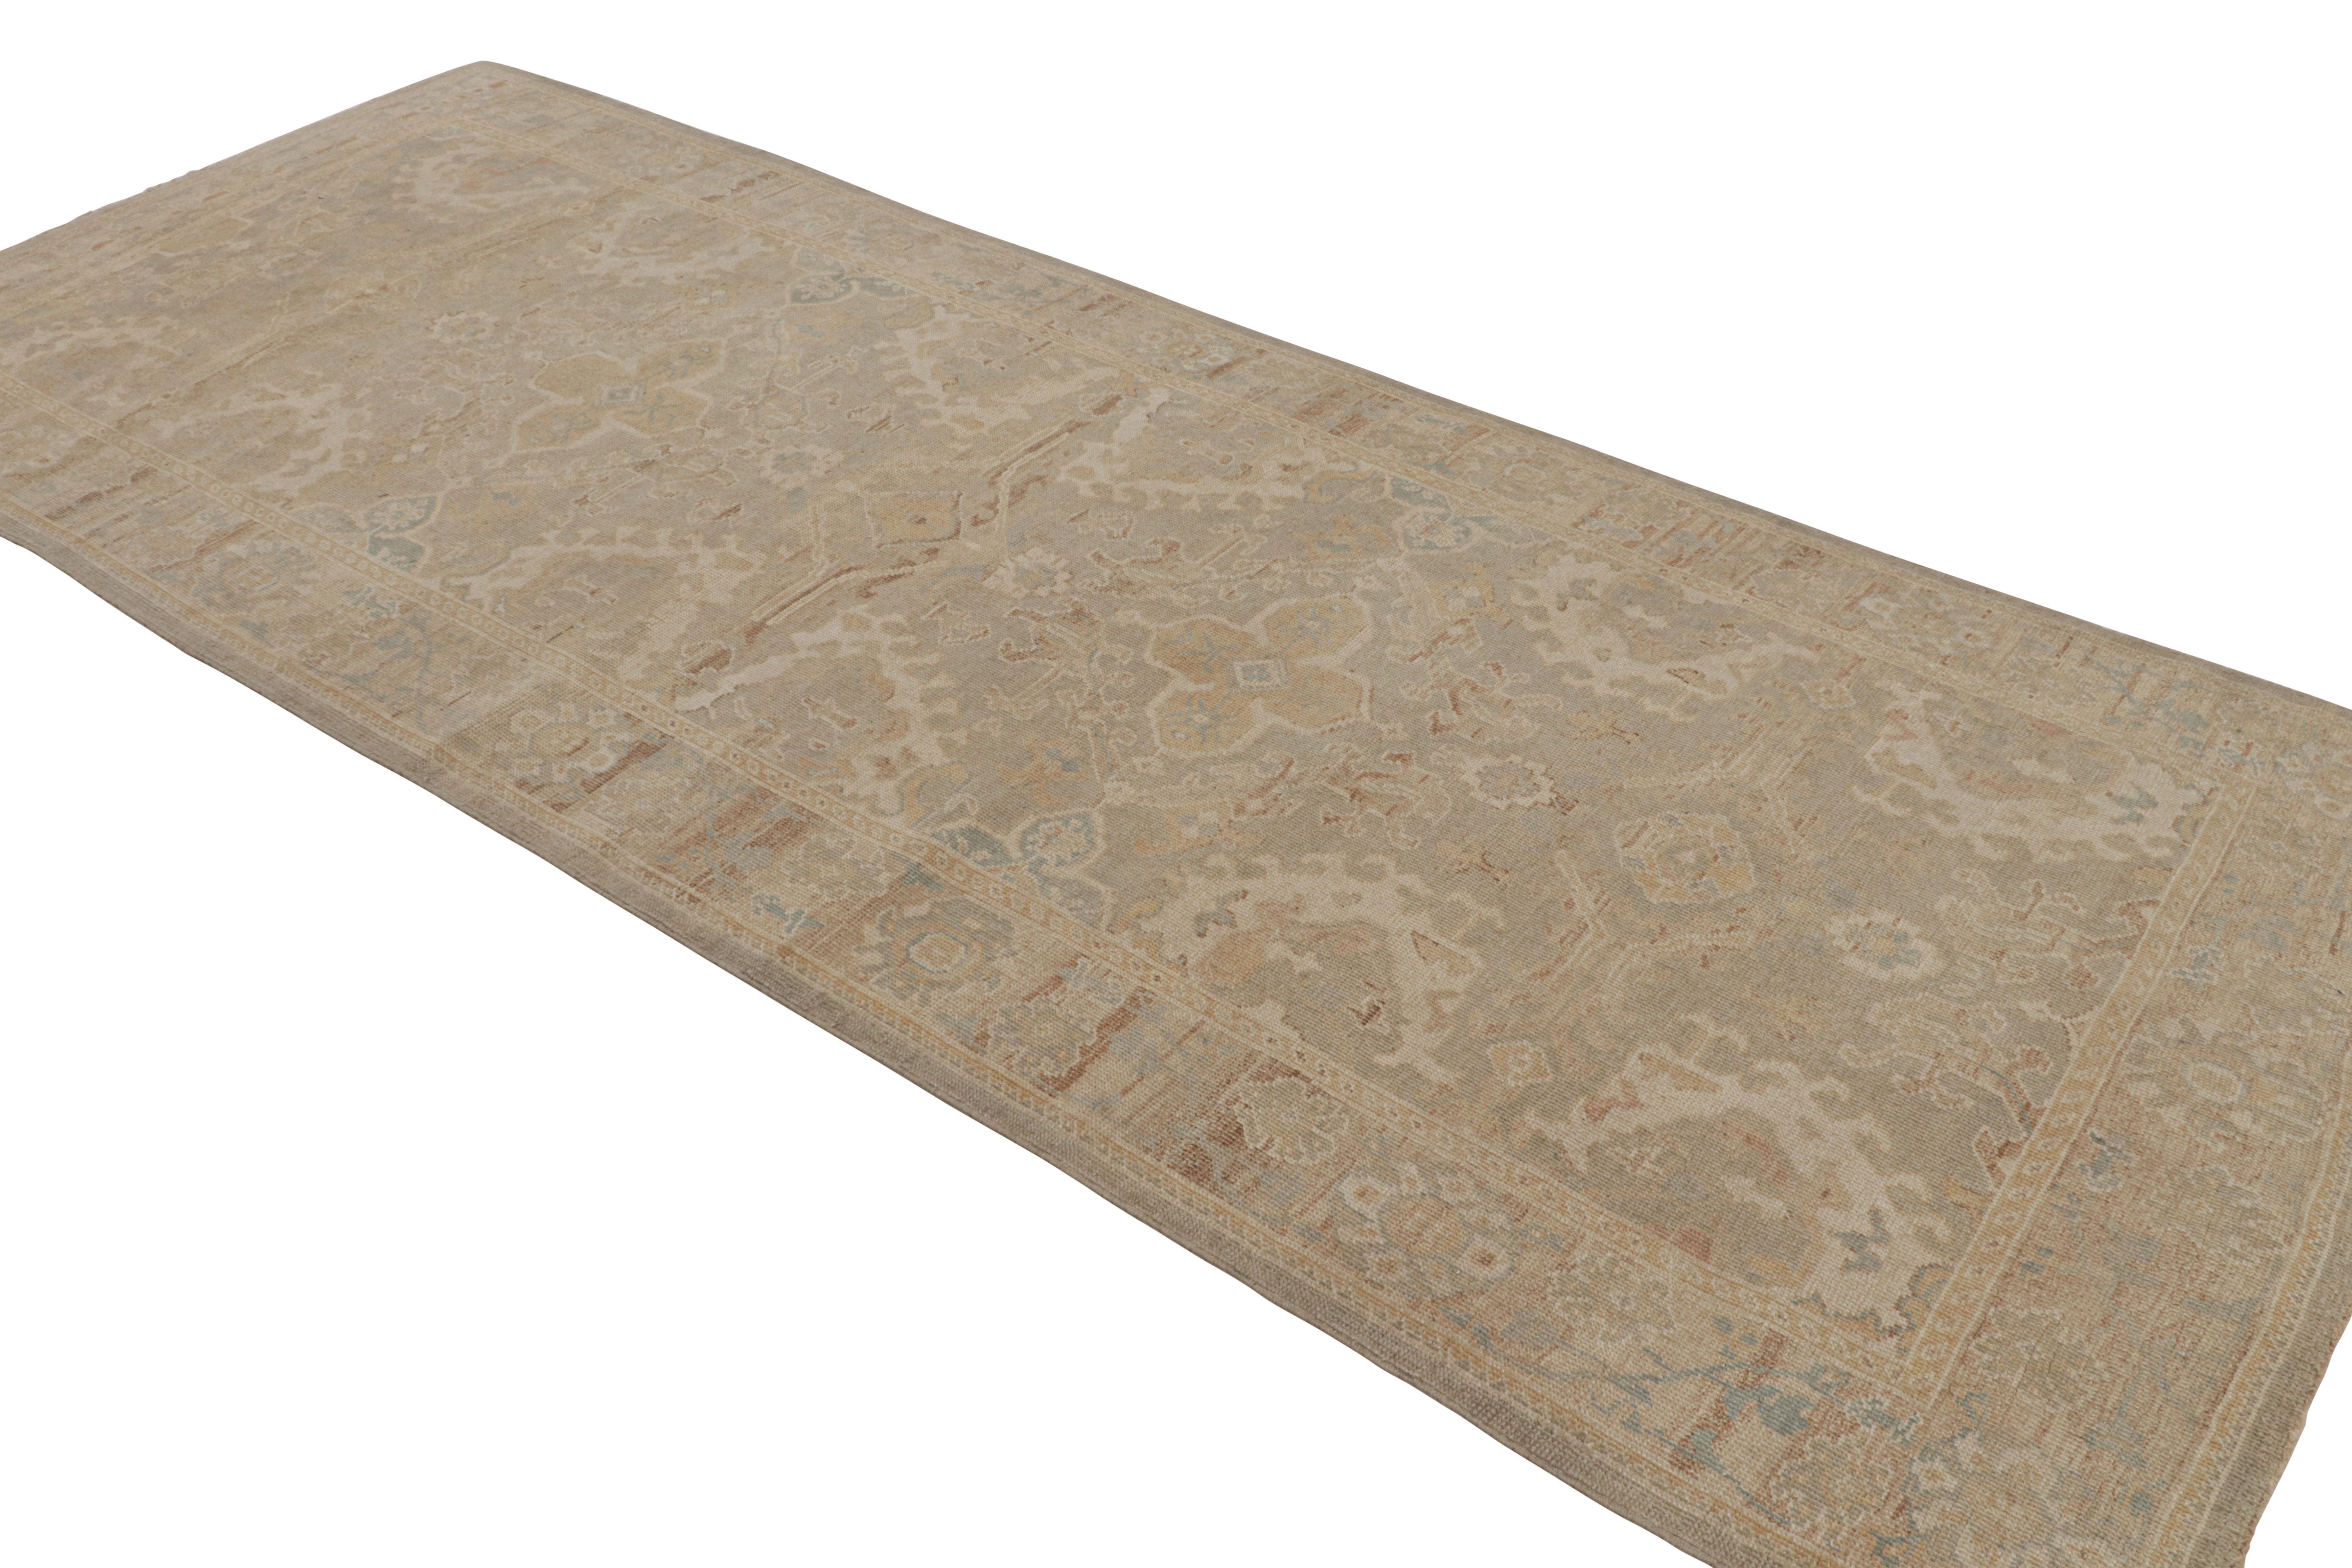 Rug & Kilim takes pride in showcasing this 5x12 ode to Khotan rug styles from the team’s Modern Classics Collection. Hand knotted in wool, the runner emanates classic sensibilities in beige-brown with a subtle blue-gray accent for a graceful